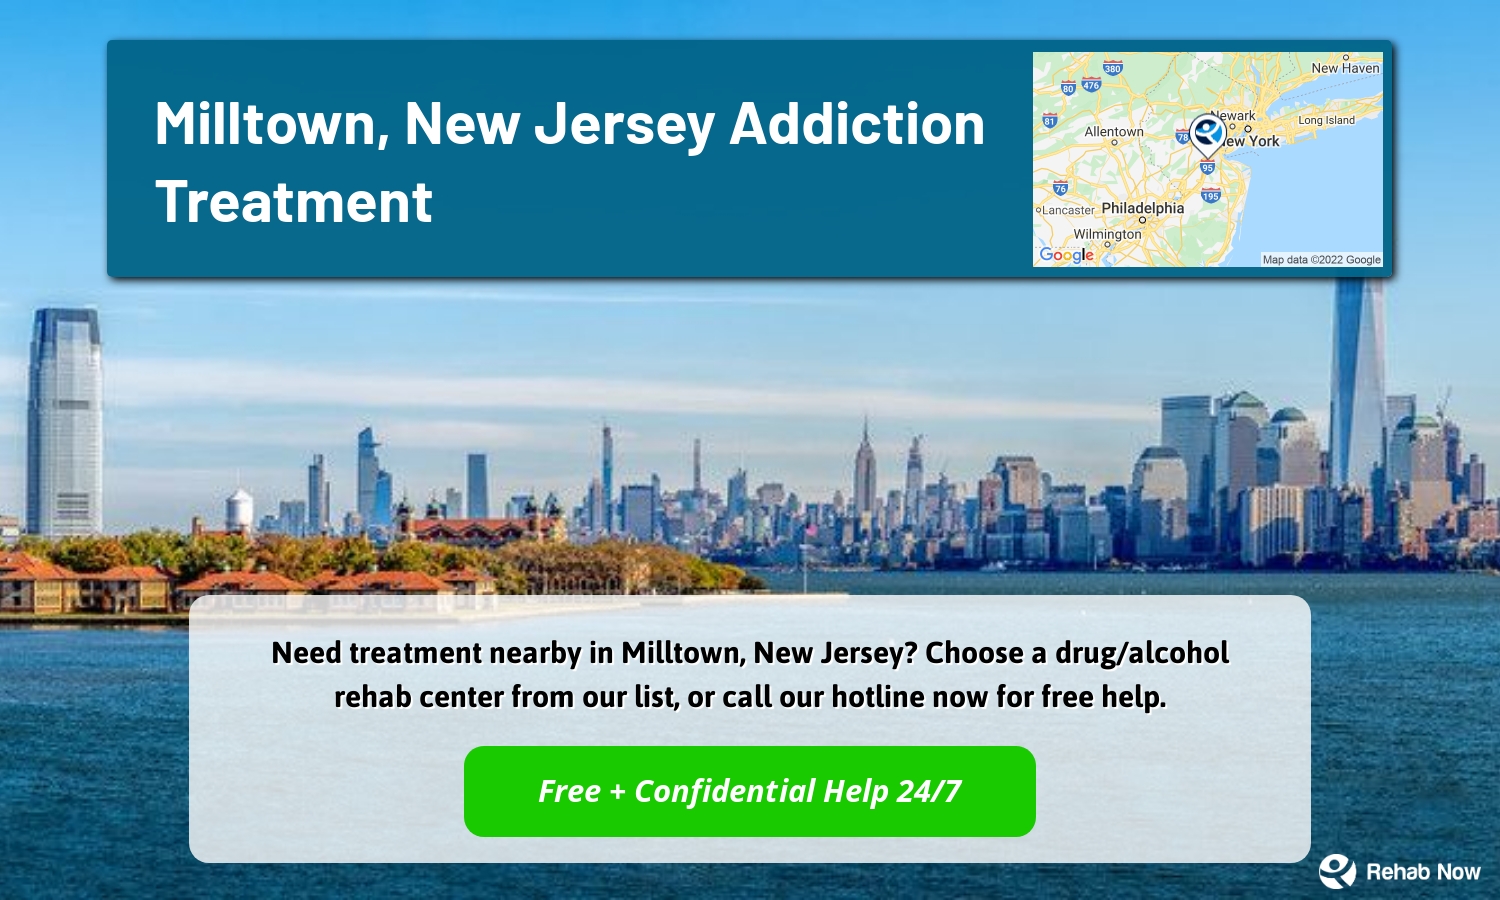 Need treatment nearby in Milltown, New Jersey? Choose a drug/alcohol rehab center from our list, or call our hotline now for free help.